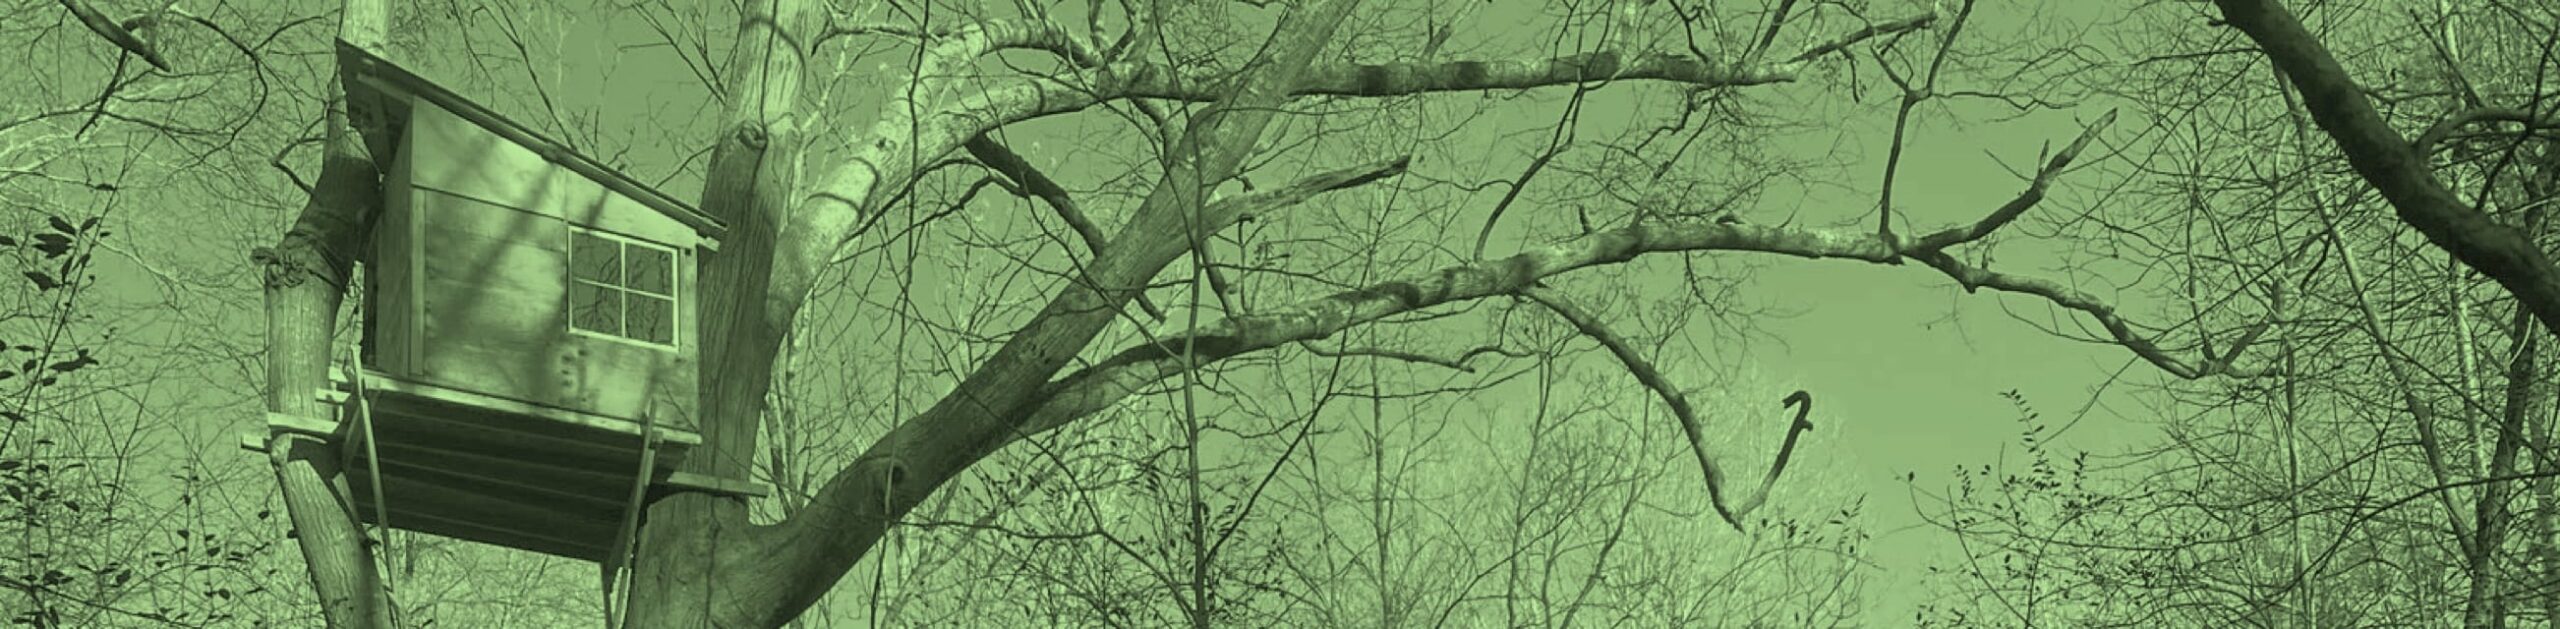 A green-tinted monochromatic photo of a deciduous tree in winter with a small wooden treehouse perched among its branches.